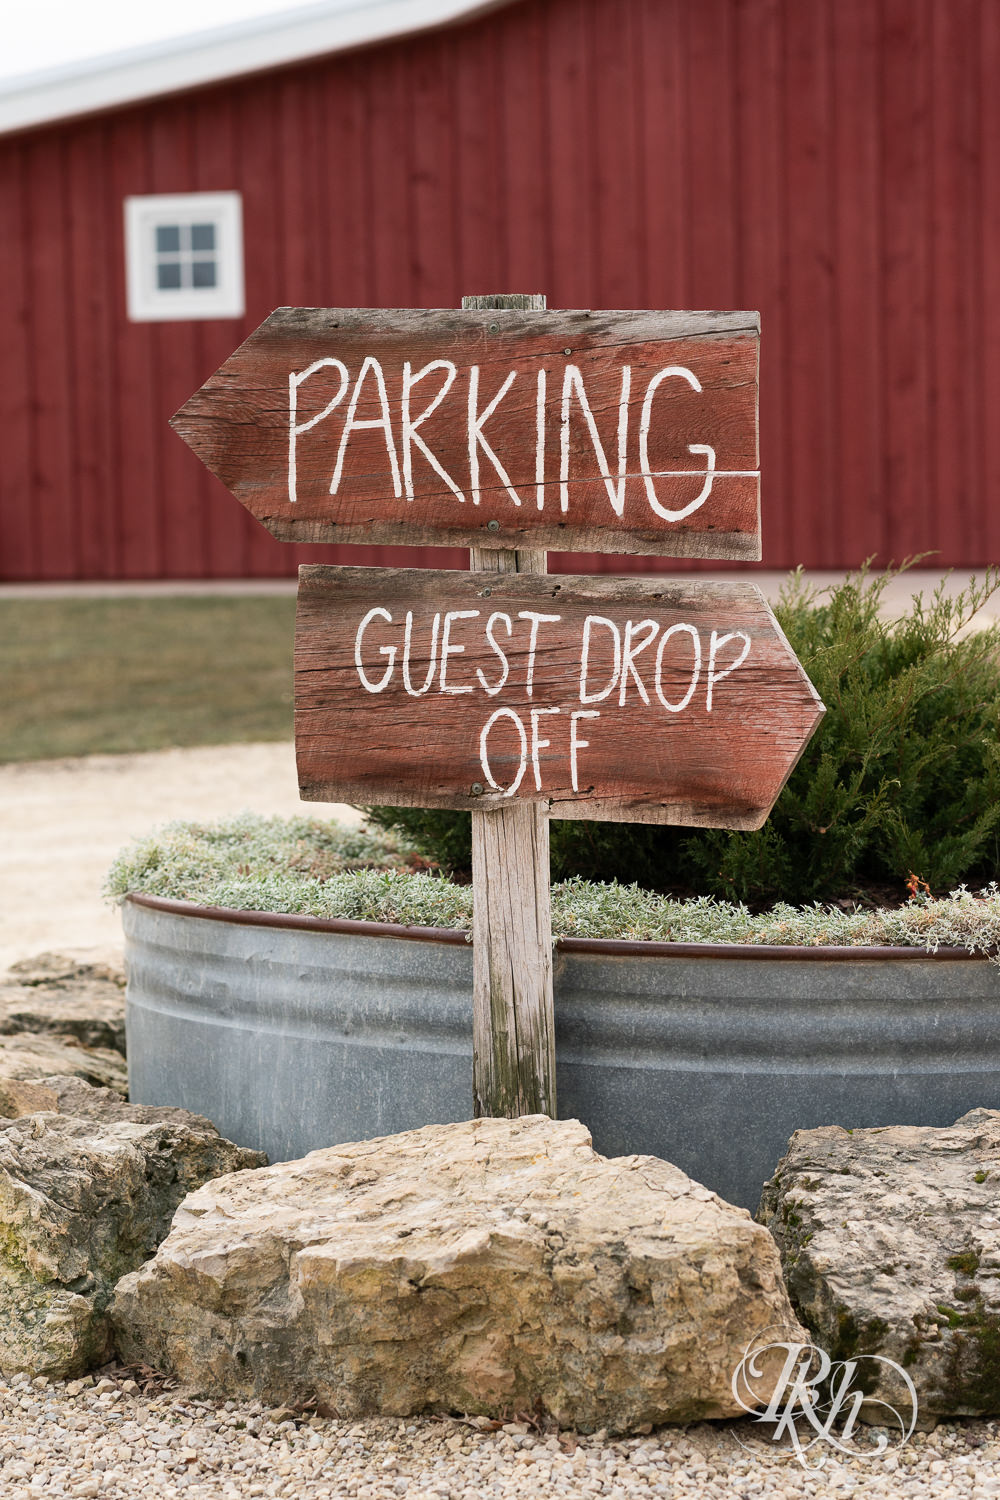 Parking sign at Almquist Farm in Hastings, Minnesota.